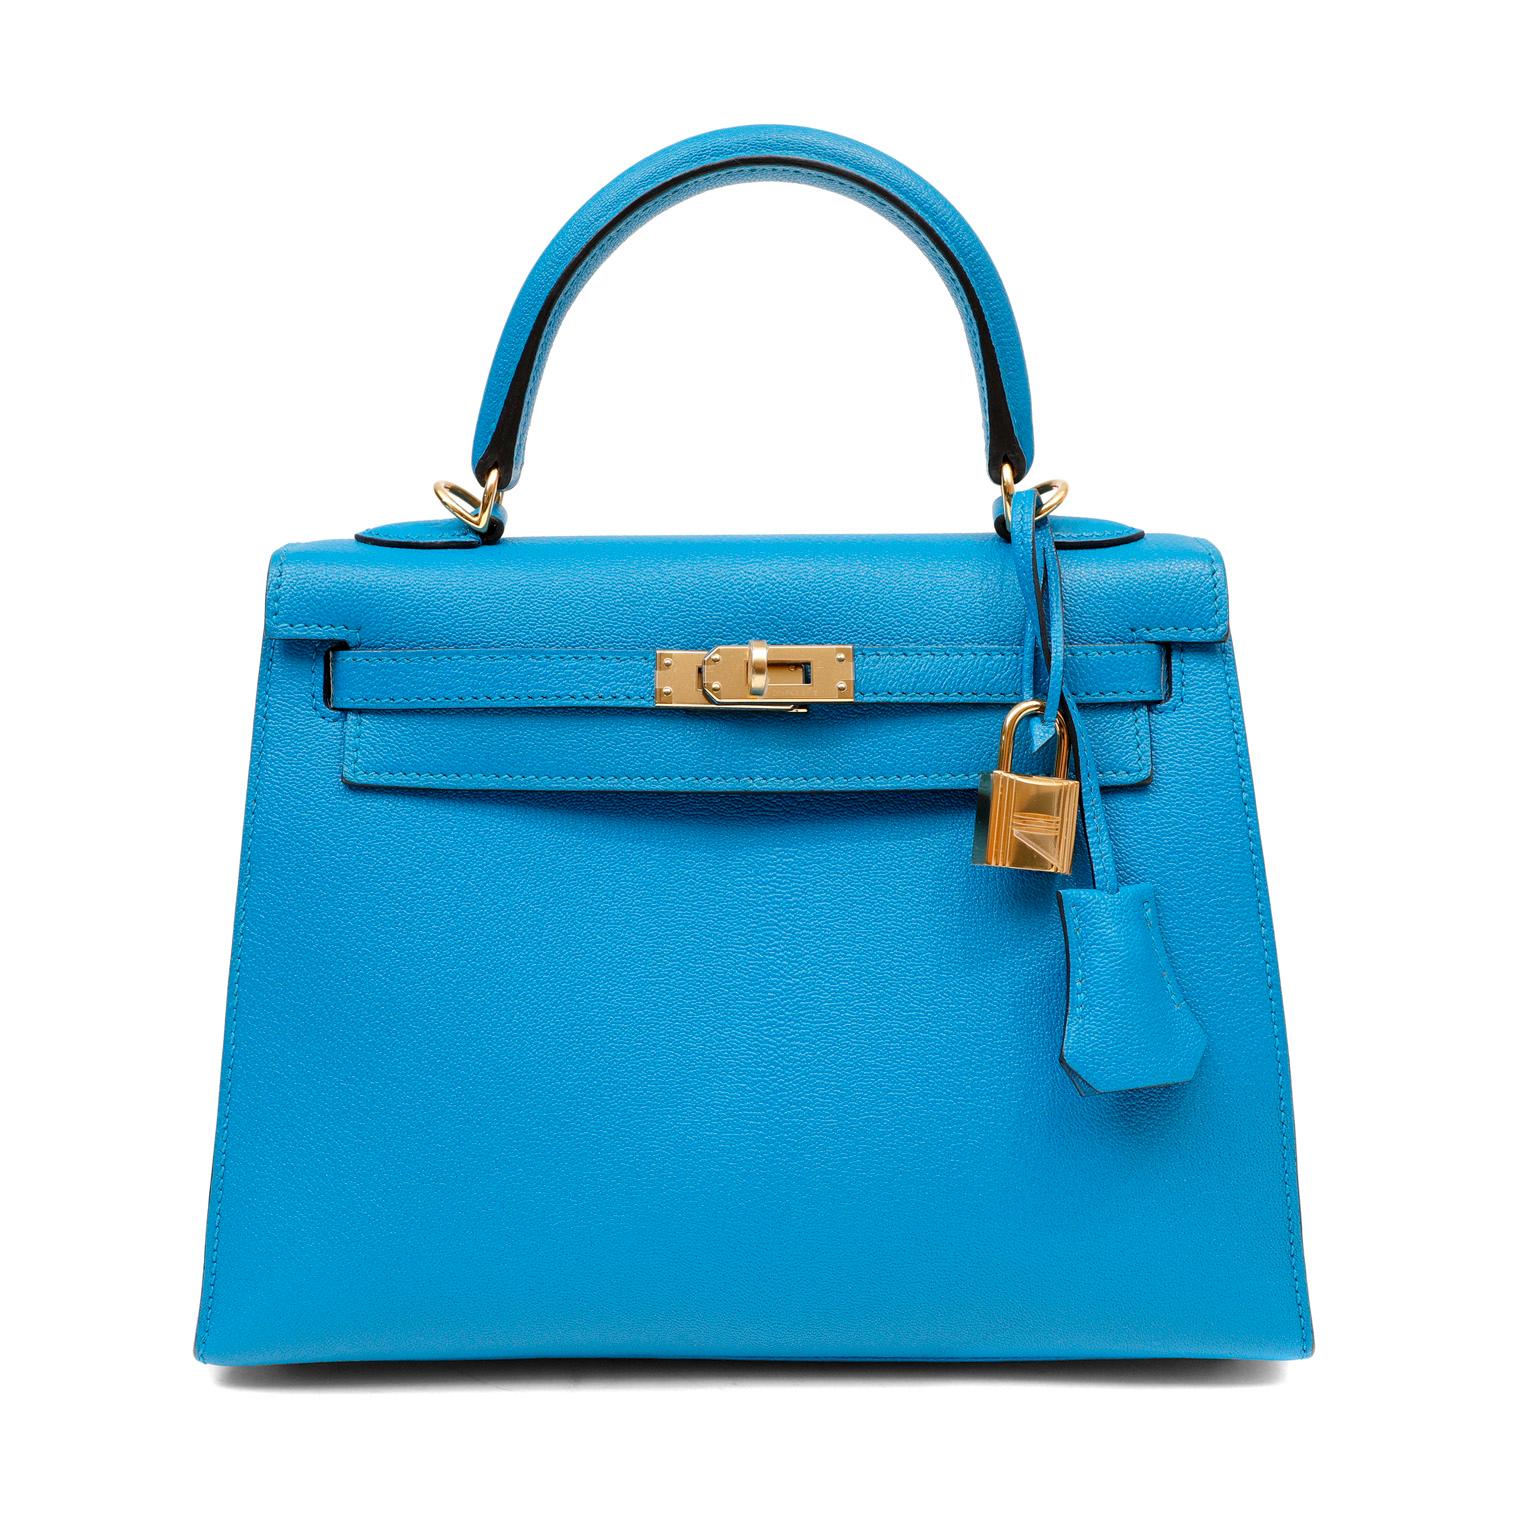 This authentic Hermès Turquoise Blue Chevre 25 cm Kelly is in pristine unworn condition with the protective plastic intact on the hardware.  Perfectly scaled in the 25 cm silhouette, this demure Kelly easily holds a phone and other